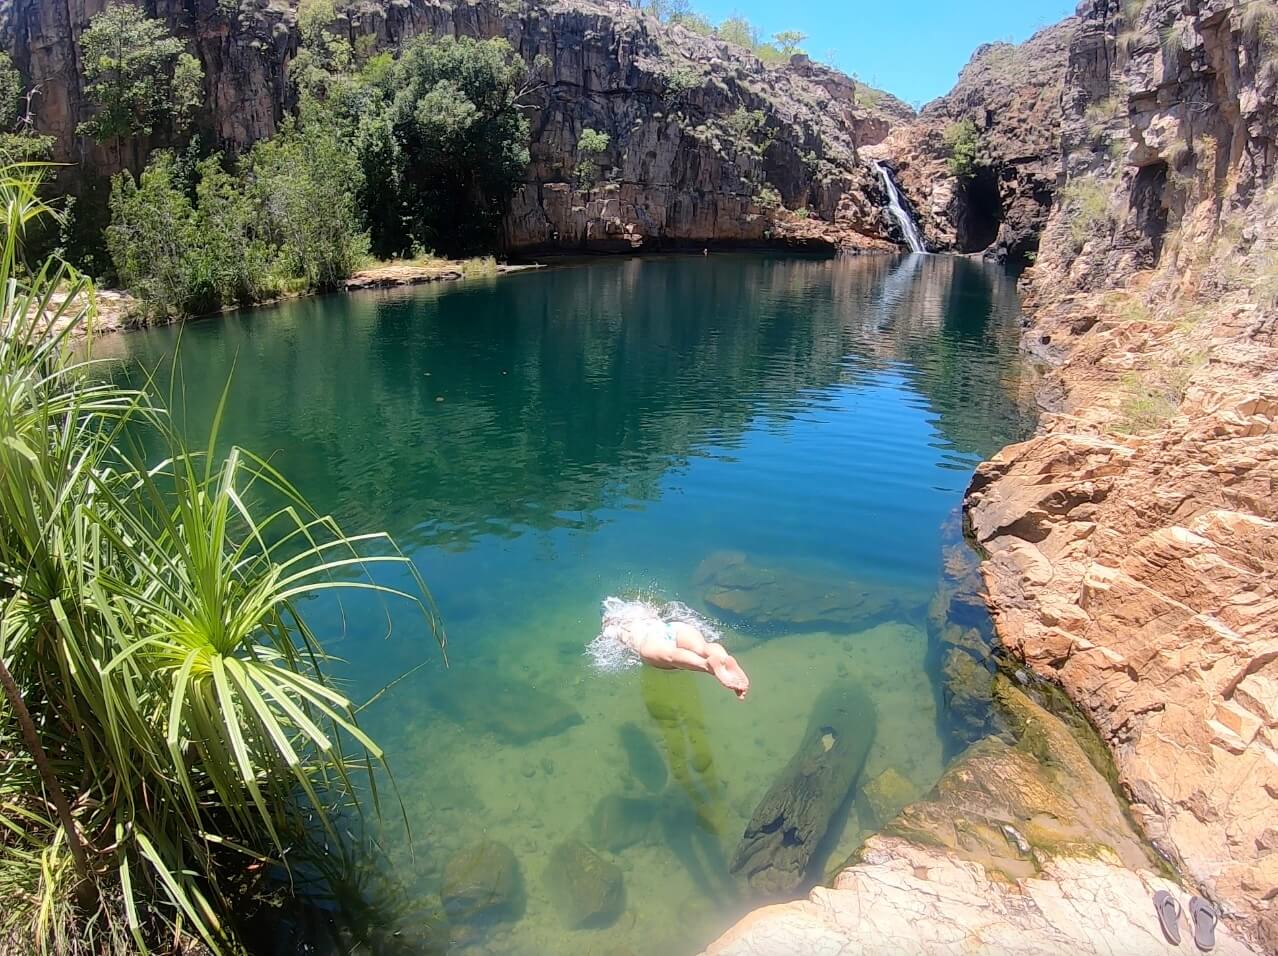 Hayley dives off a rock into the water at Maguk